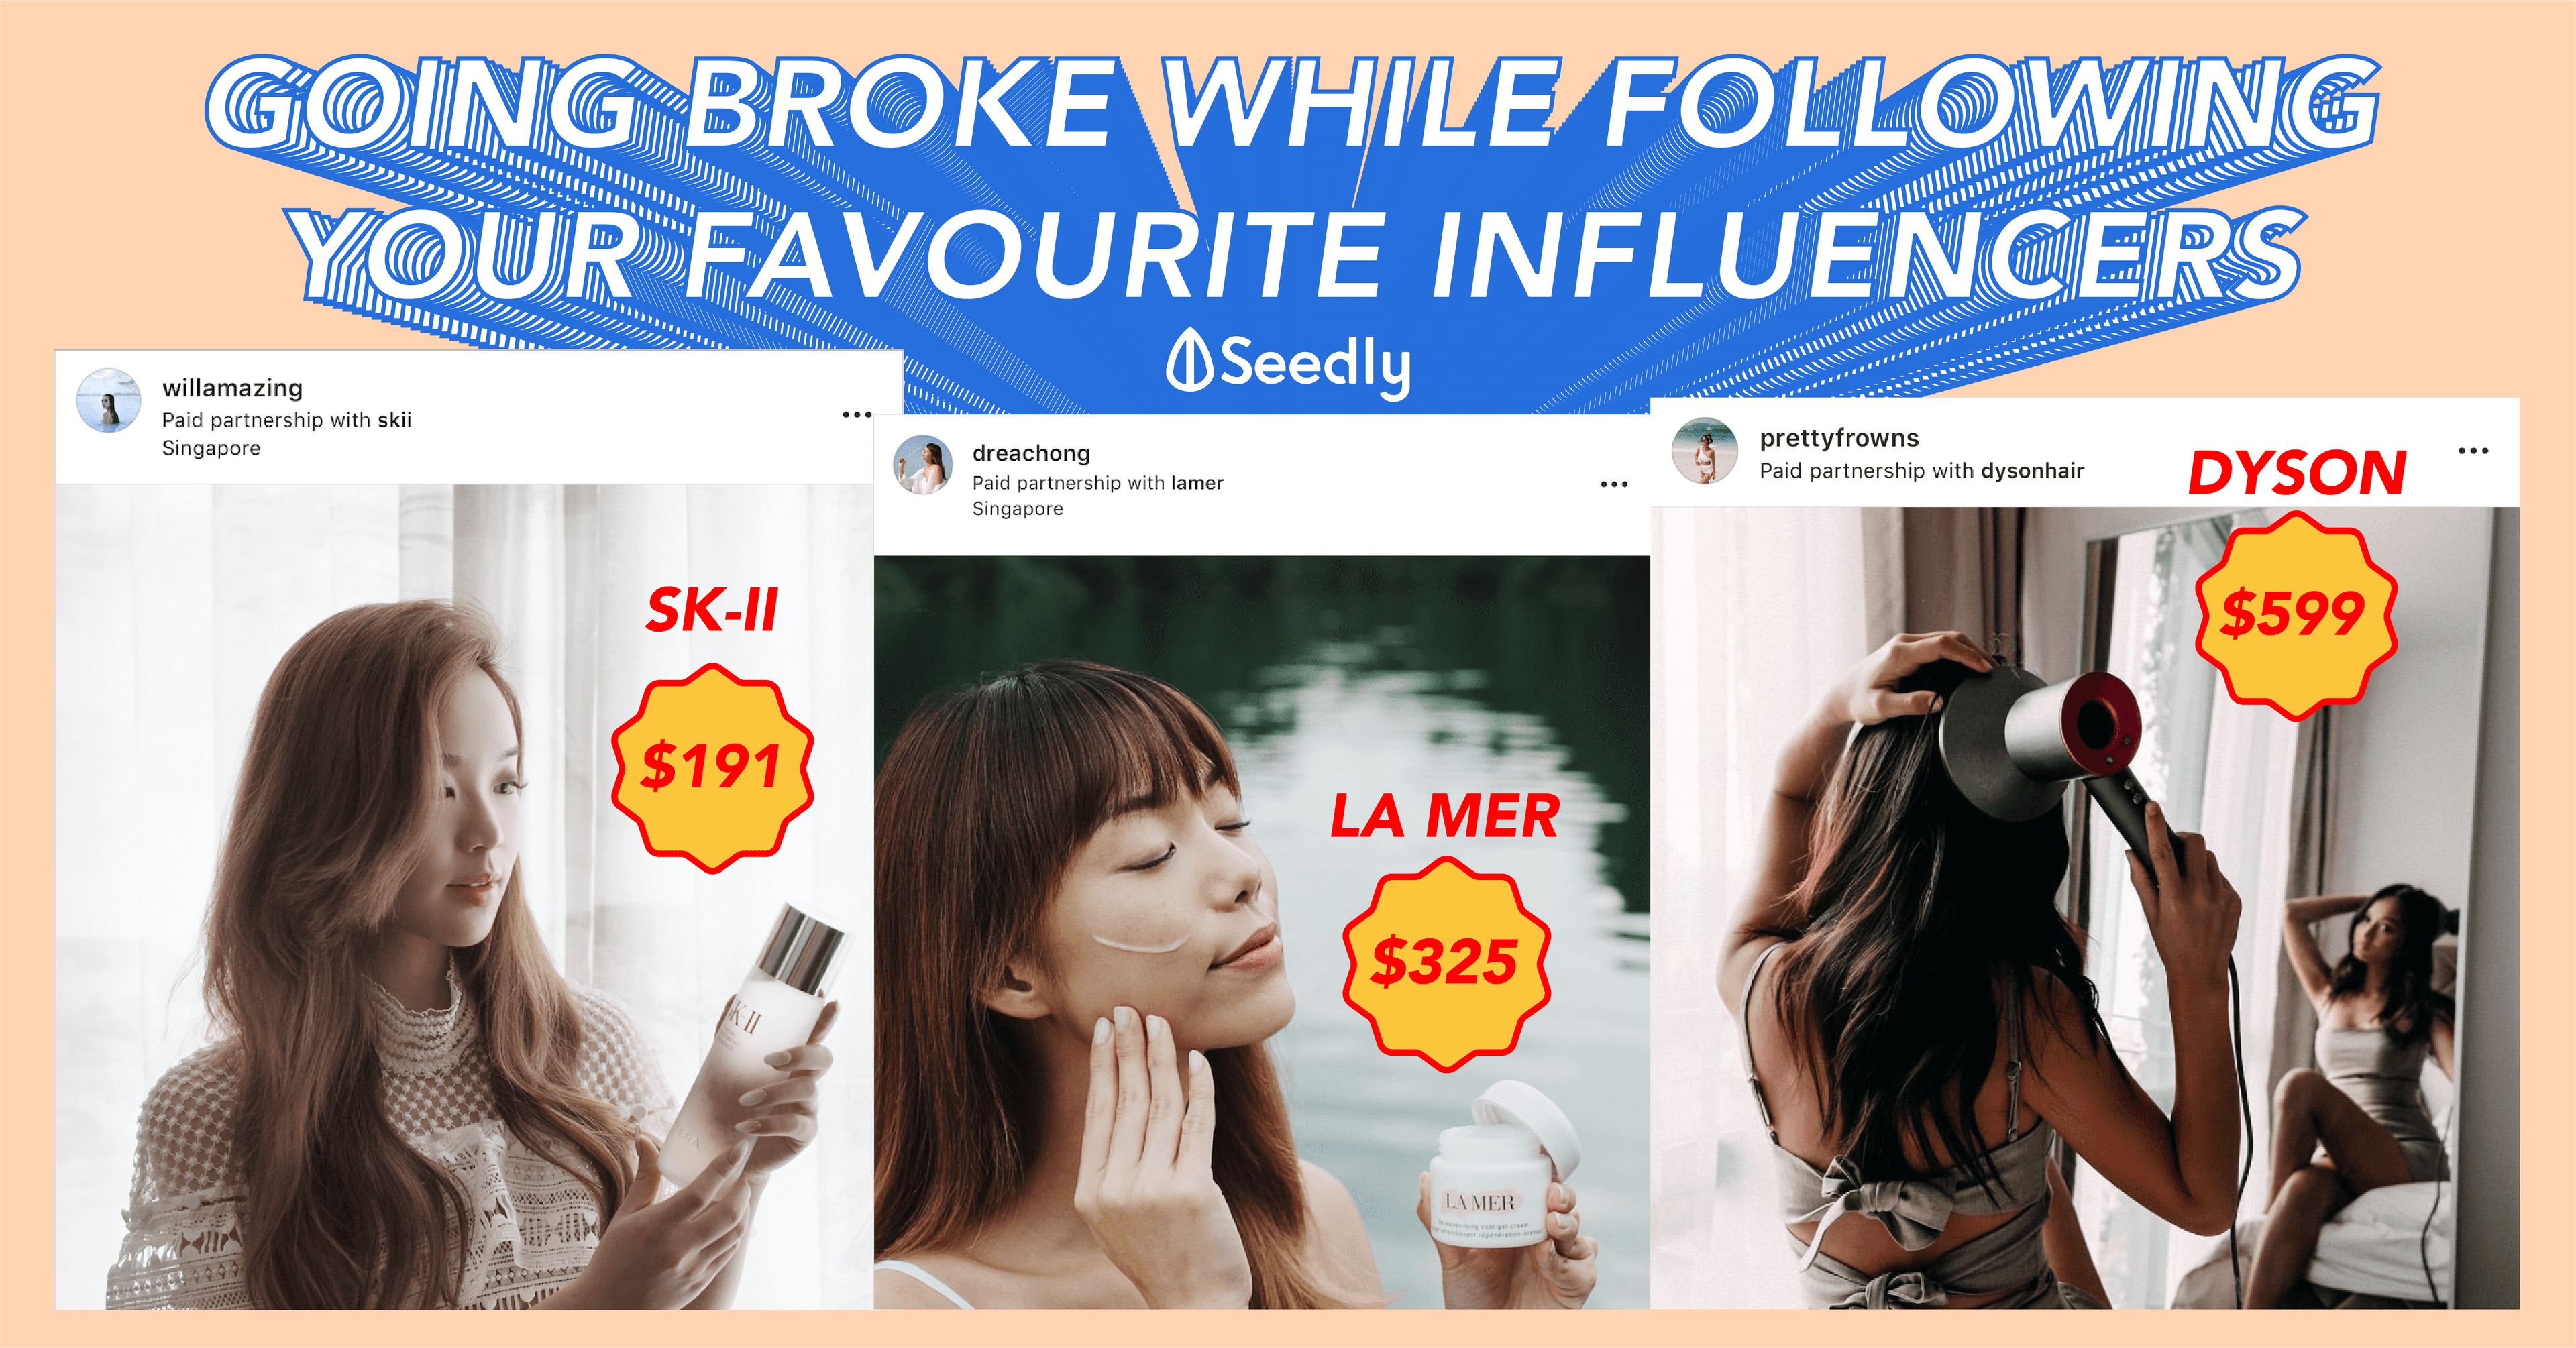 The Damage When Purchasing The Products Your Favourite Influencers Promotes